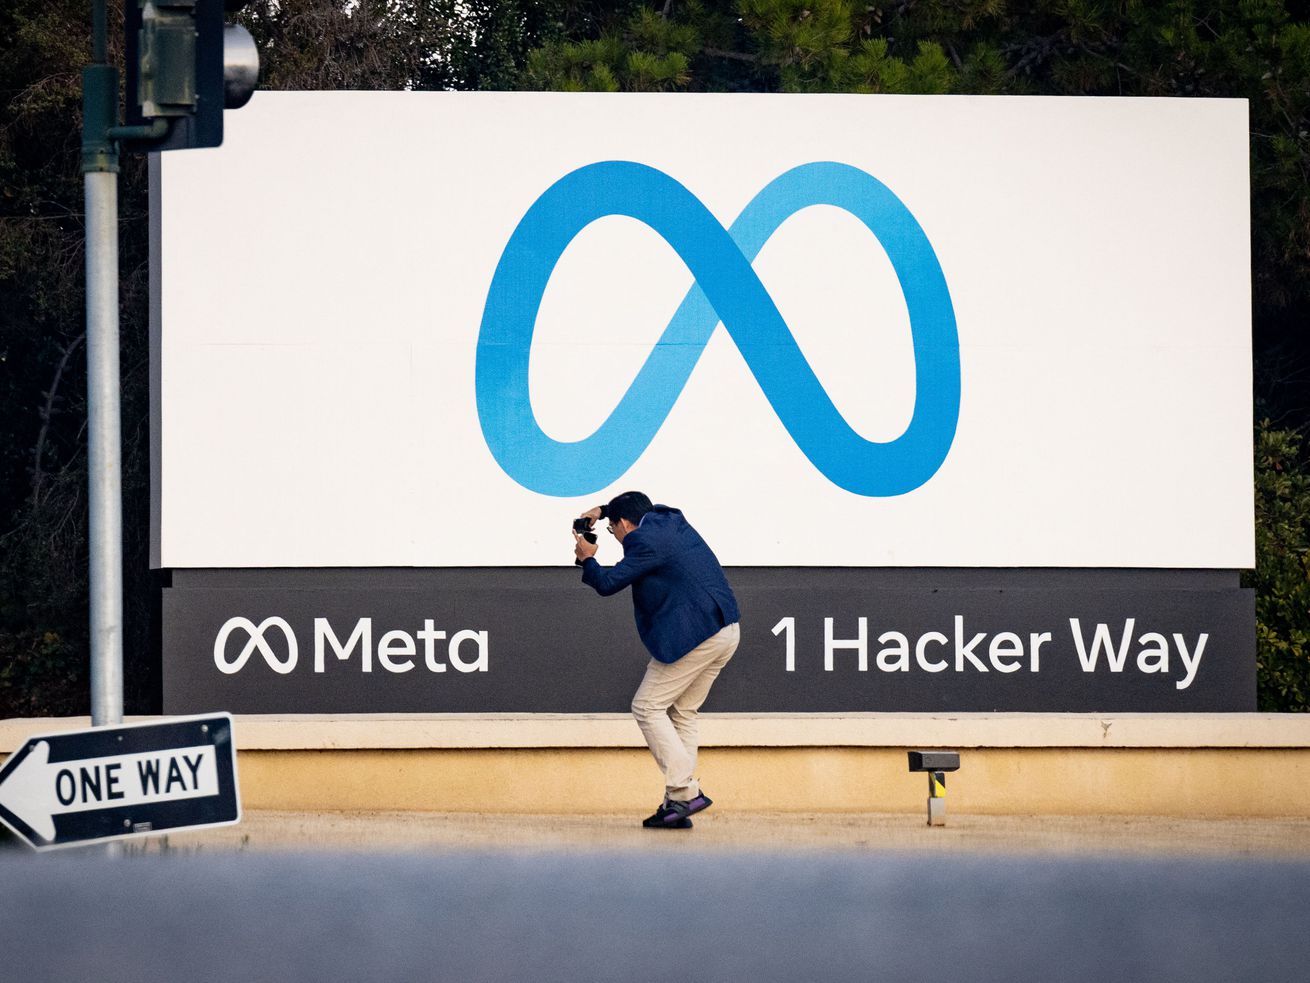 A person taking a picture of the Meta sign at 1 Hacker Way.